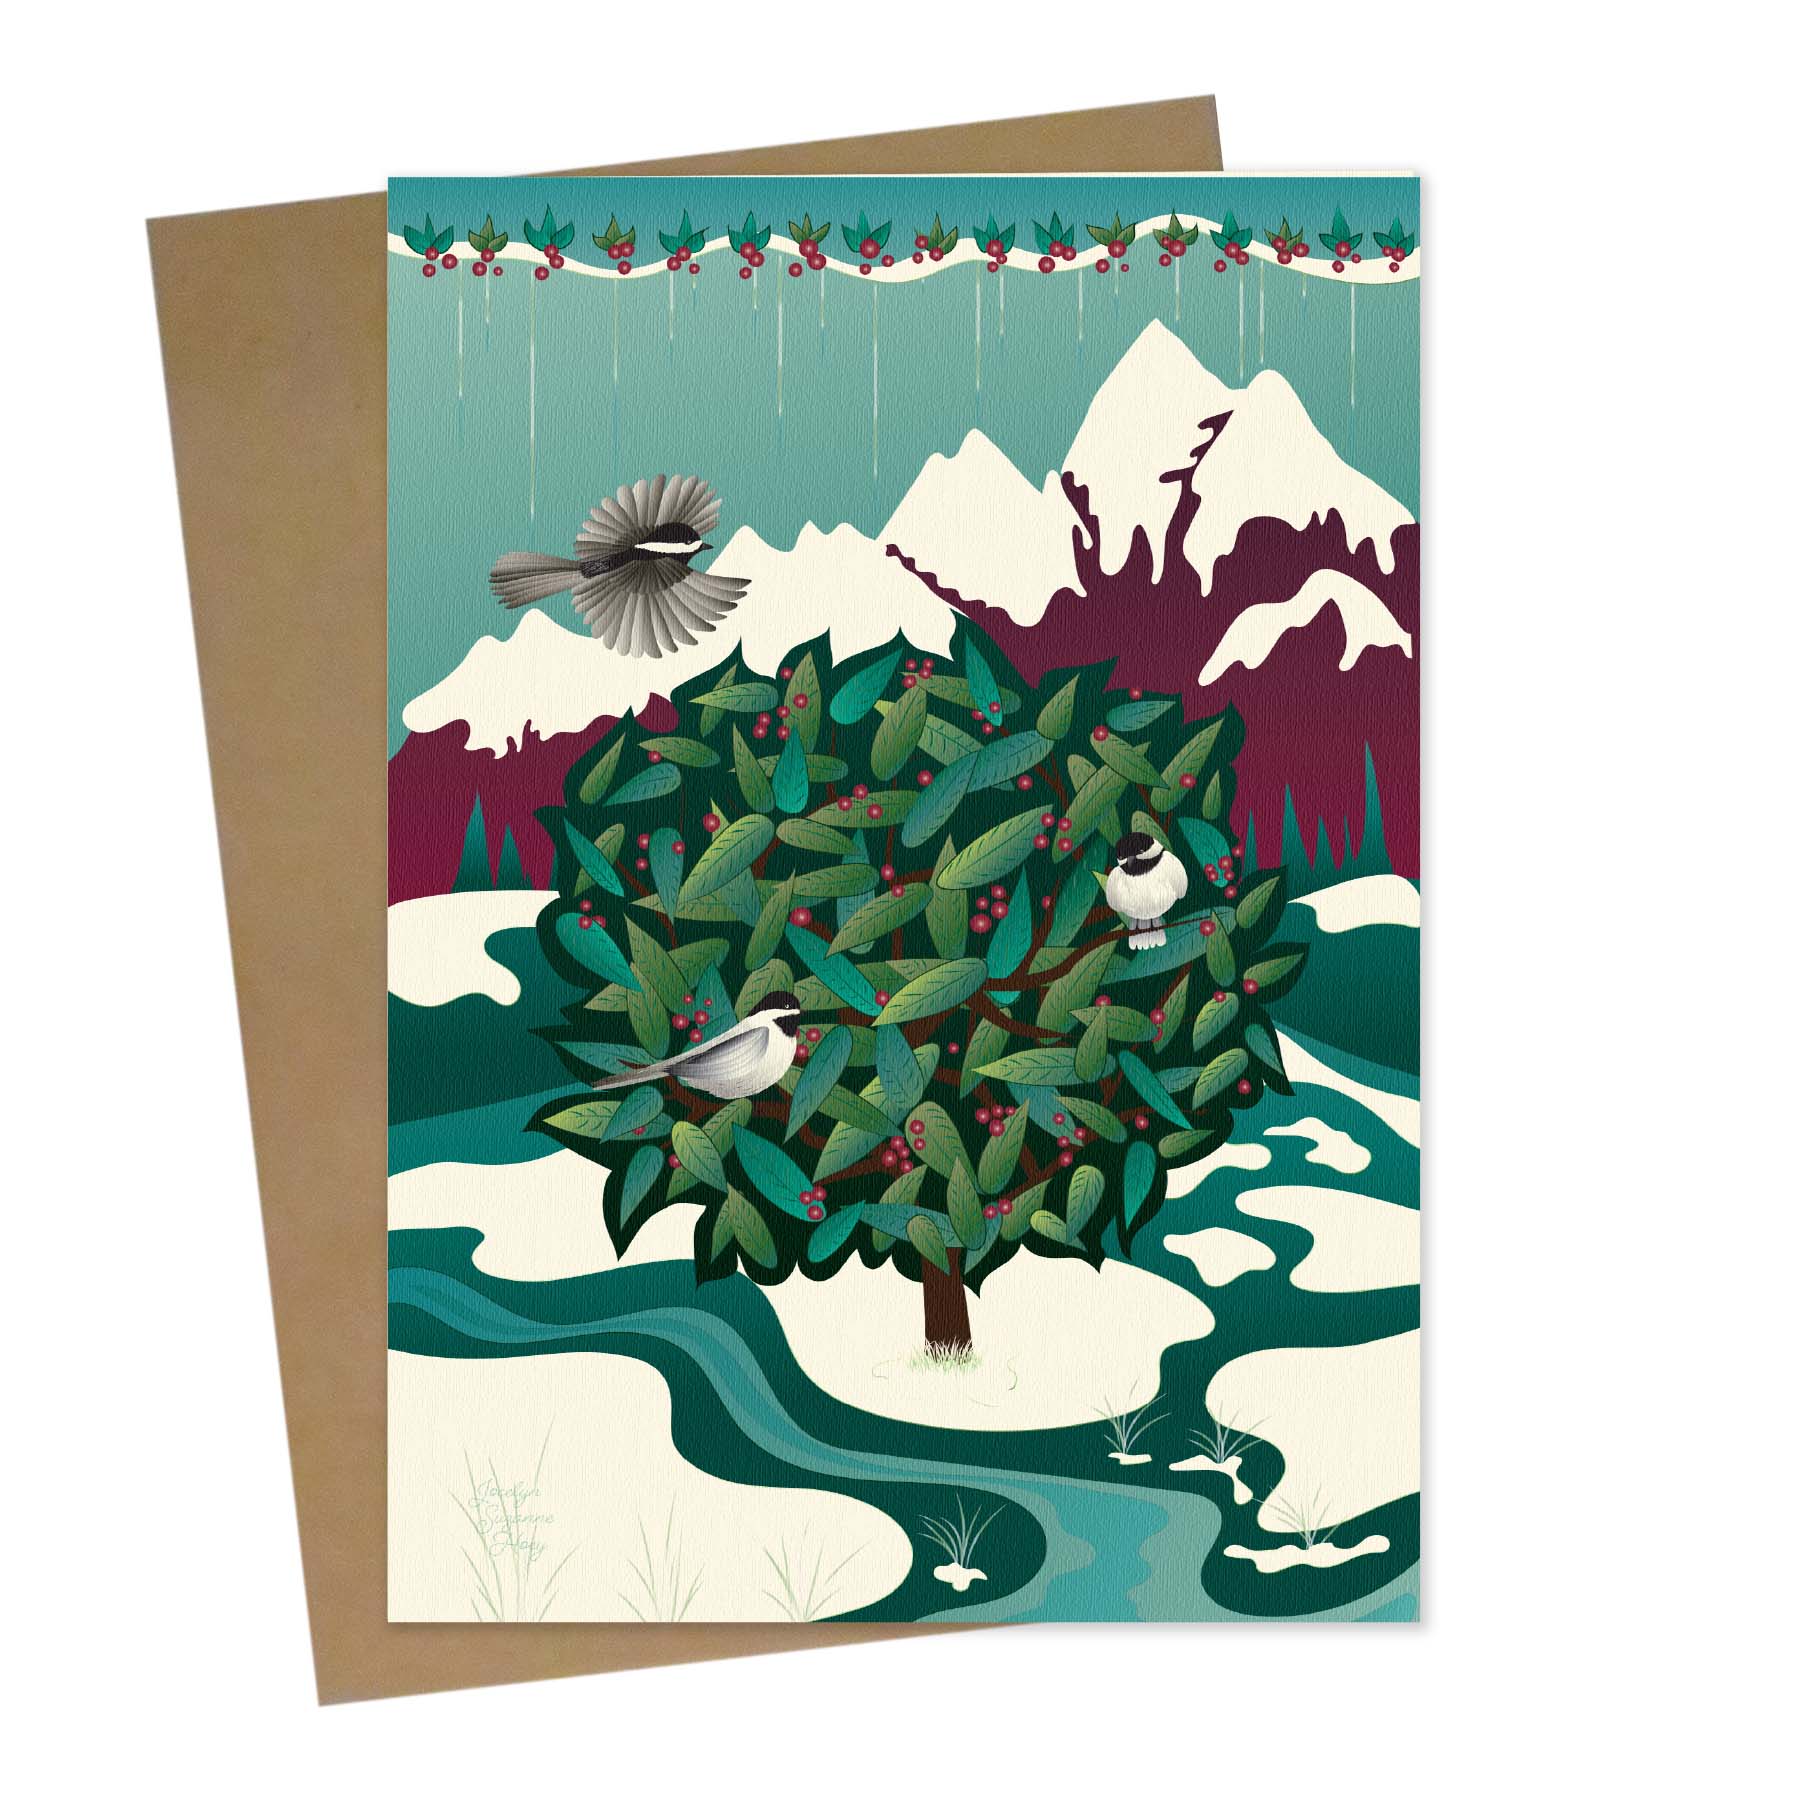 Mockup for greeting card showing winter birds relaxing eating berries in a tree, in front of a mountain scene